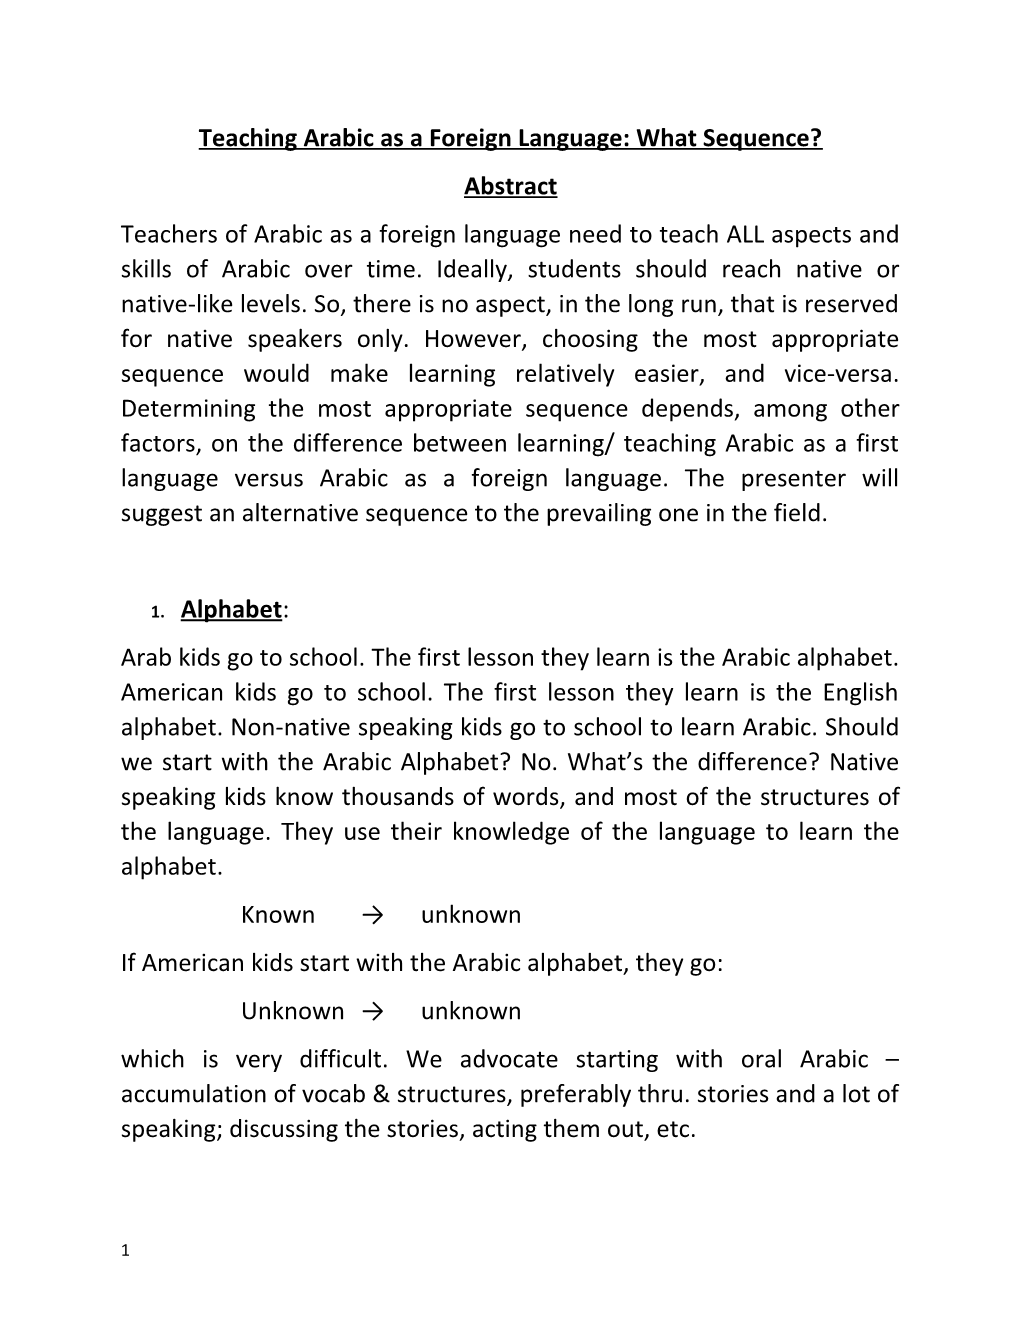 Teaching Arabic As a Foreign Language: What Sequence?